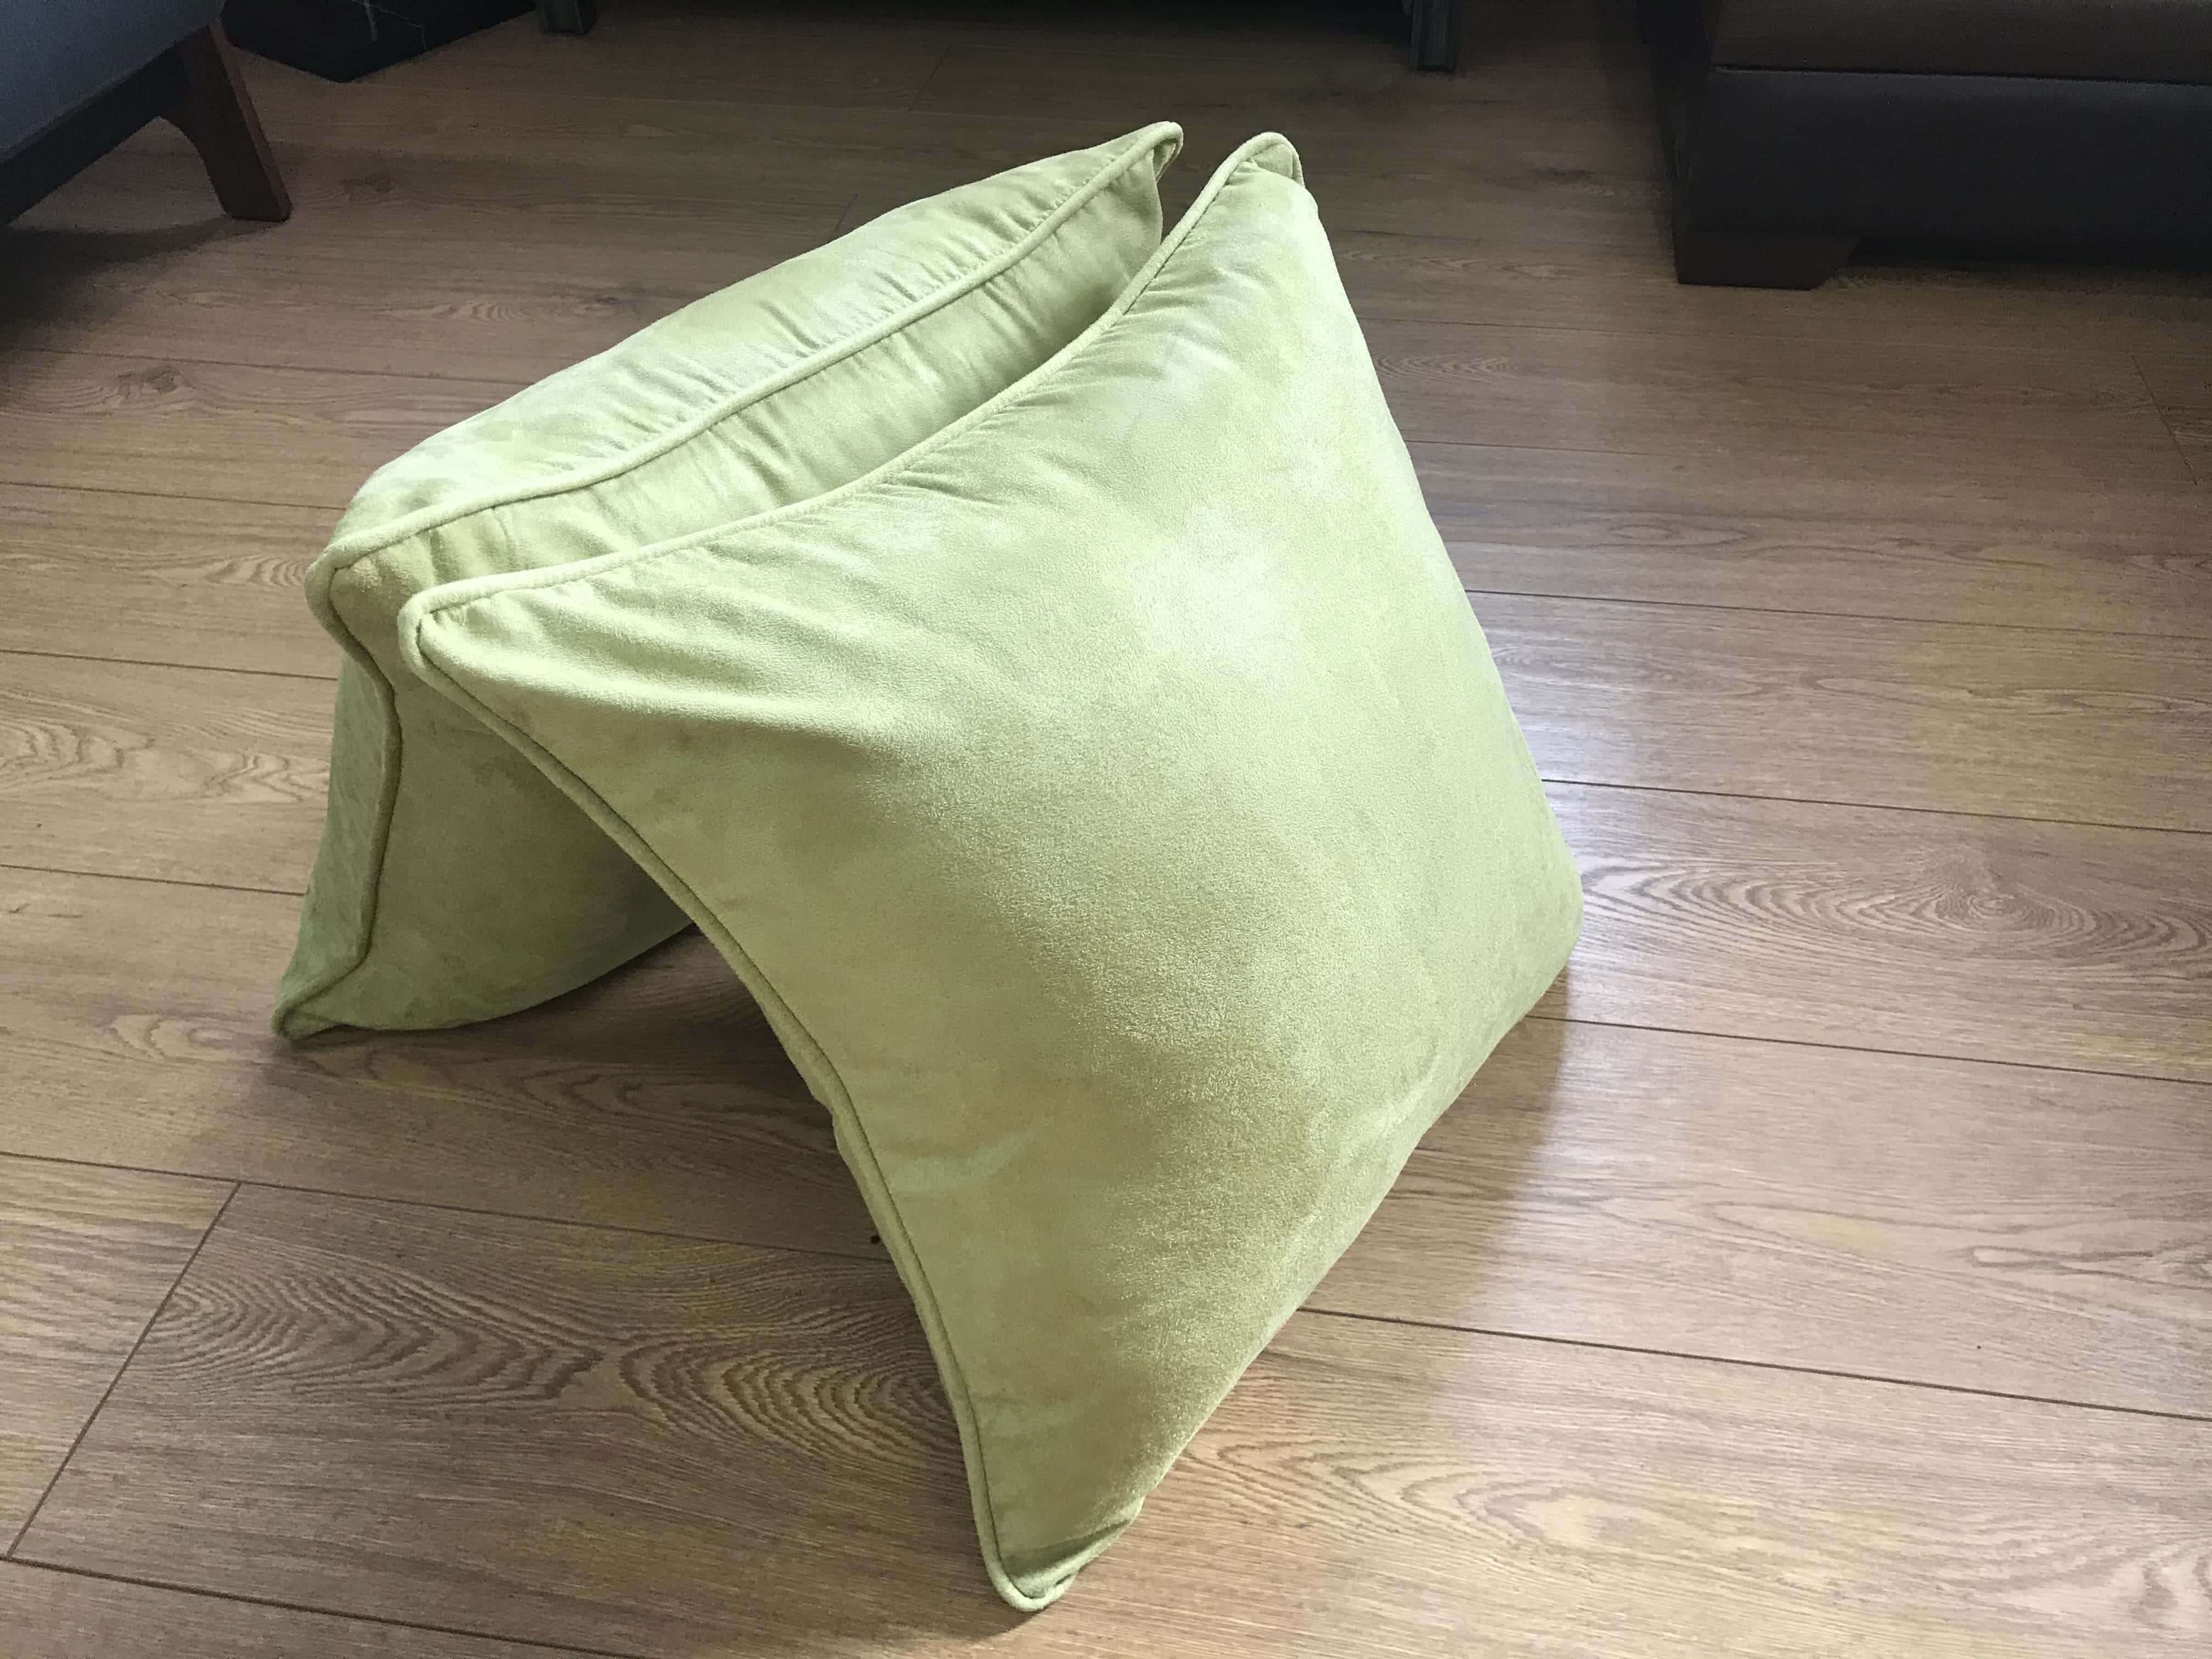 Suede Green Throw Pillows 20x20 w/Piping (Set of 2) by Prestige